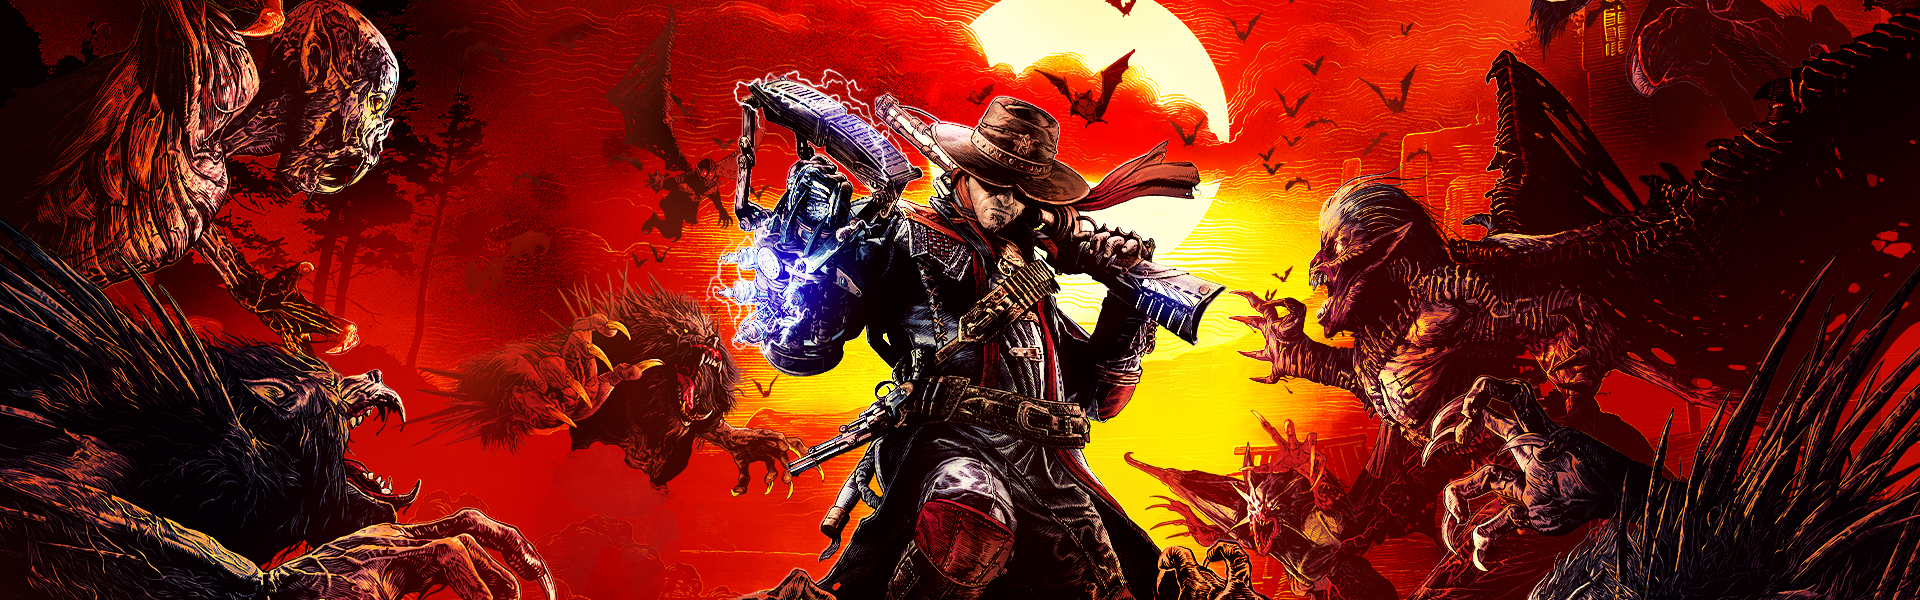 Evil West Xbox Series XS and Xbox One resolution and modes revealed